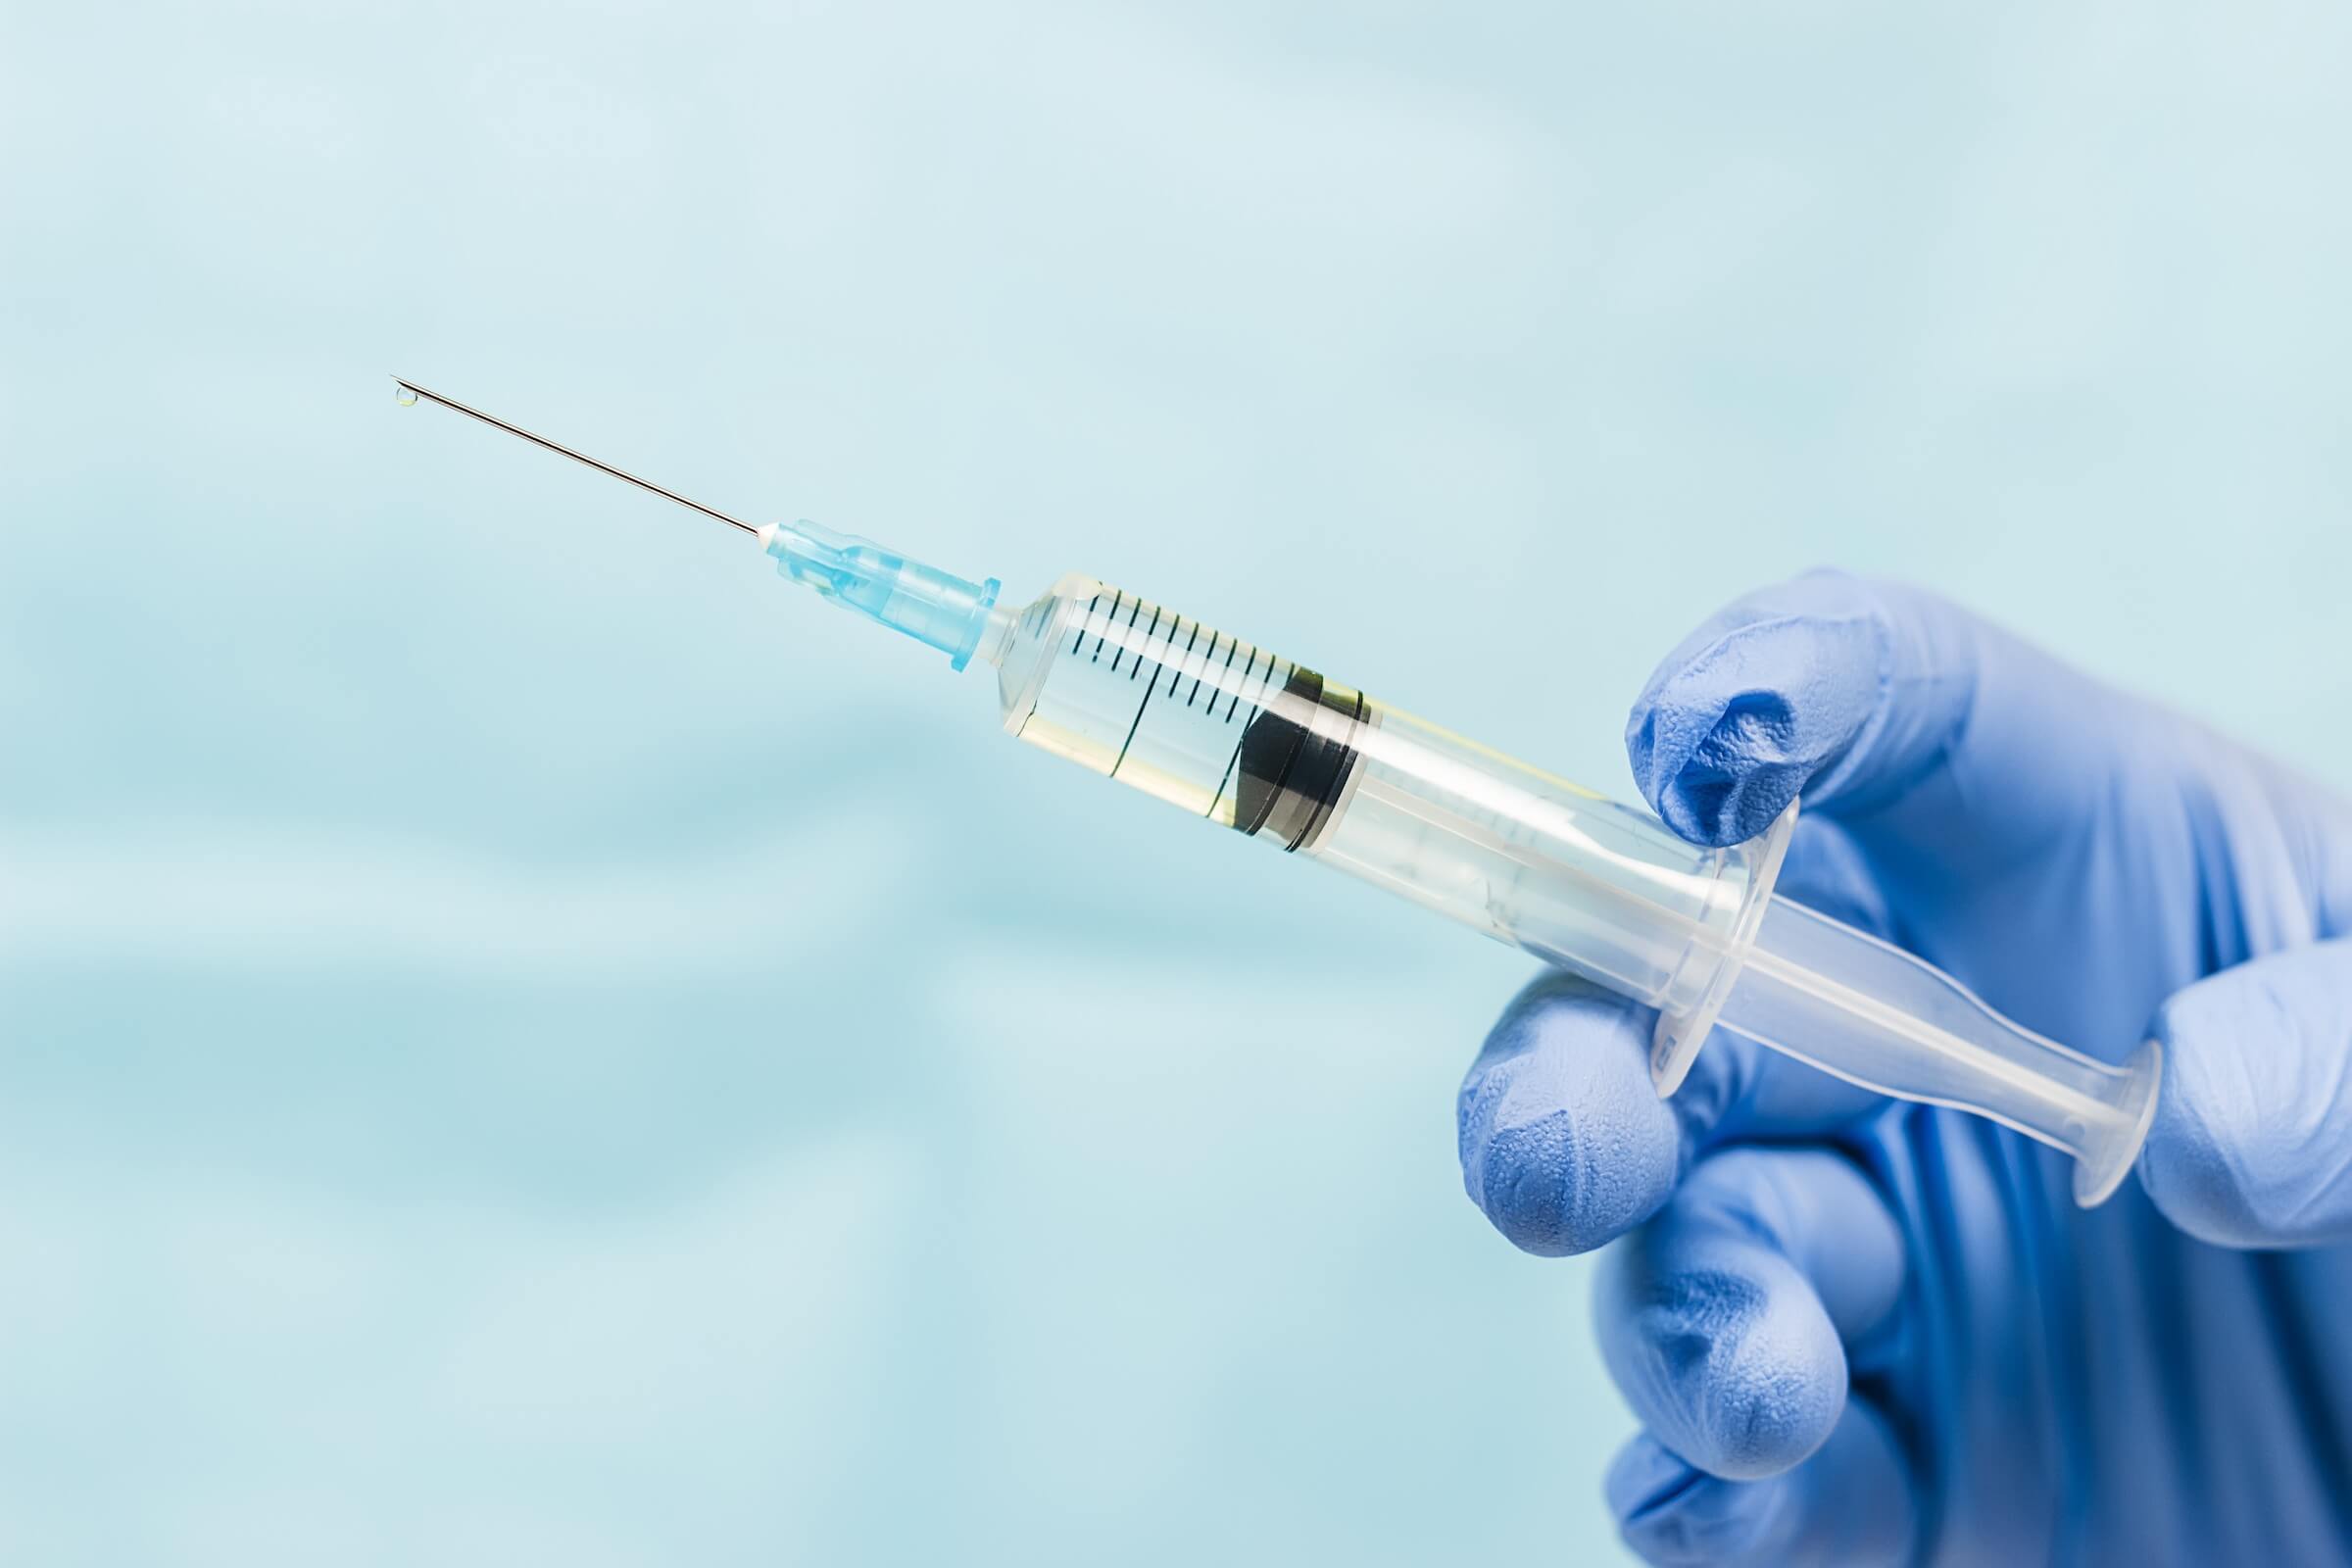 Does size matter when it comes to needles?